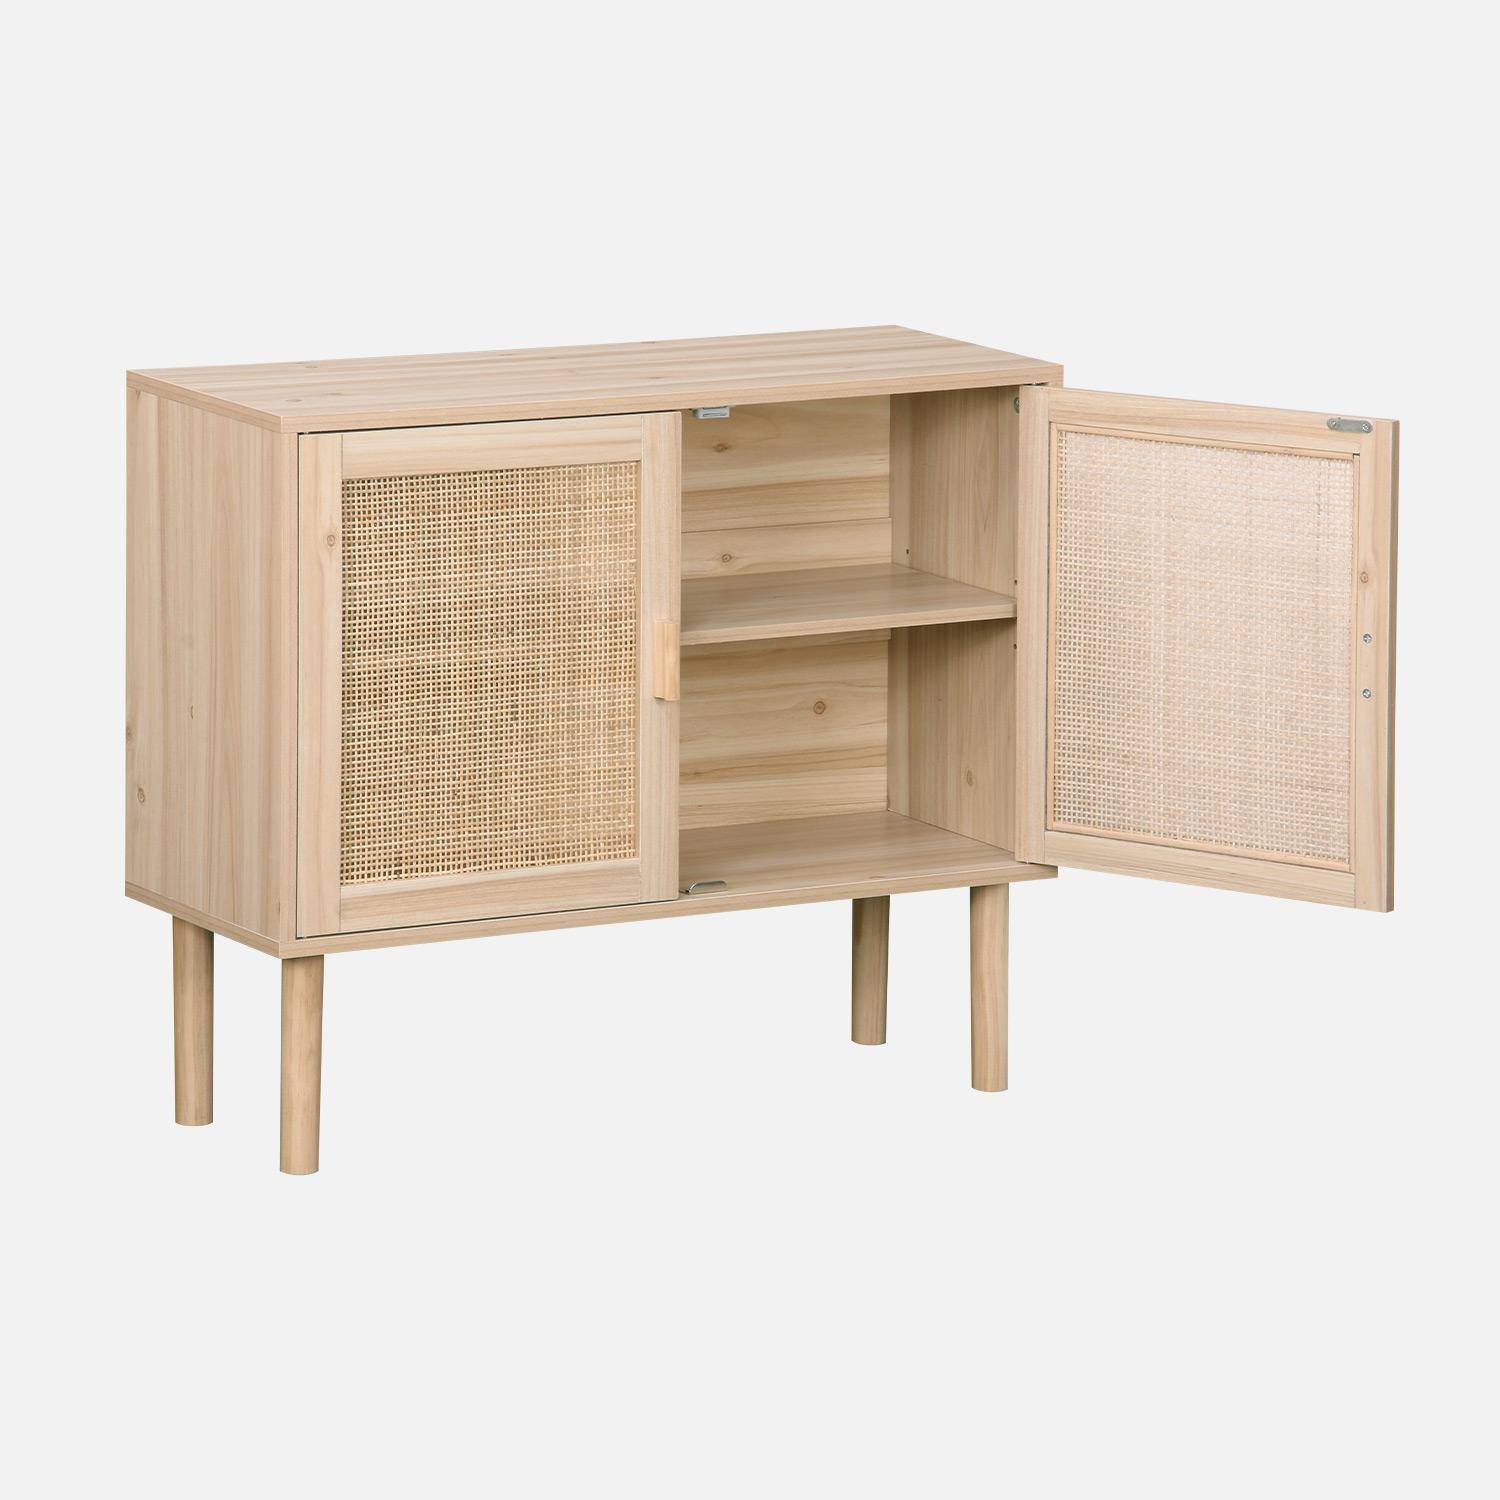 Wood and woven rattan 2-door storage cabinet with shelves, 80x30x68cm, Camargue, Natural Photo5